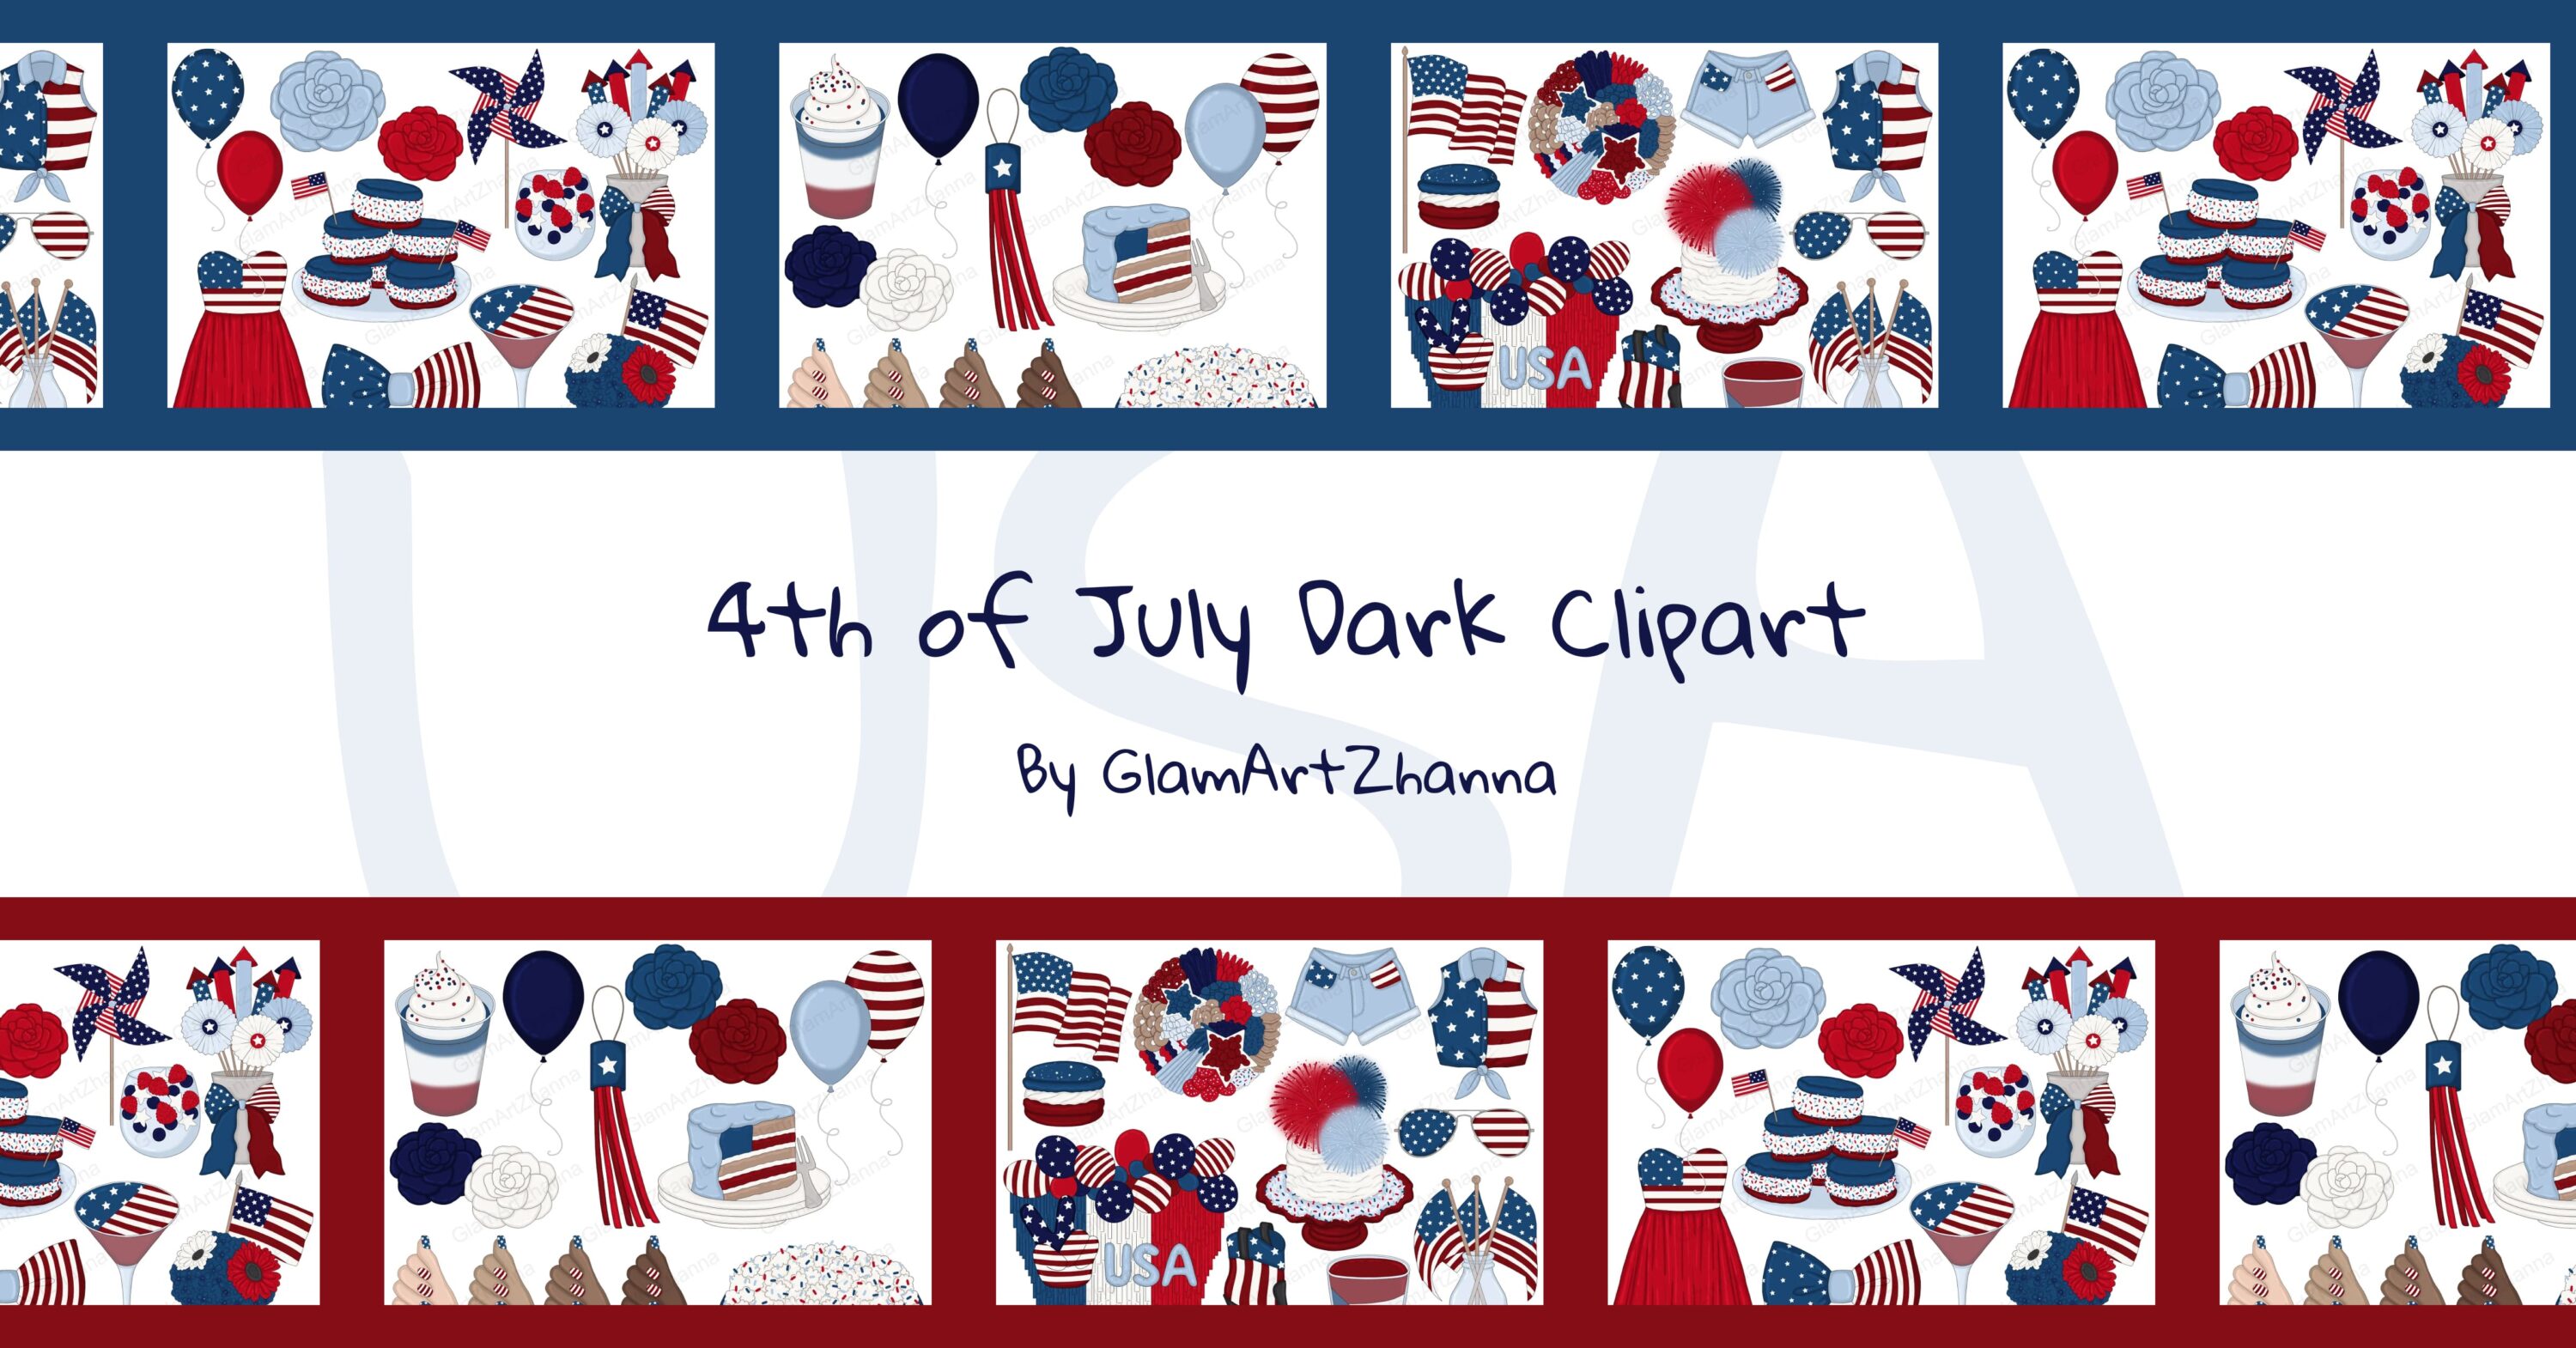 4th of July Dark Clipart facebook image.